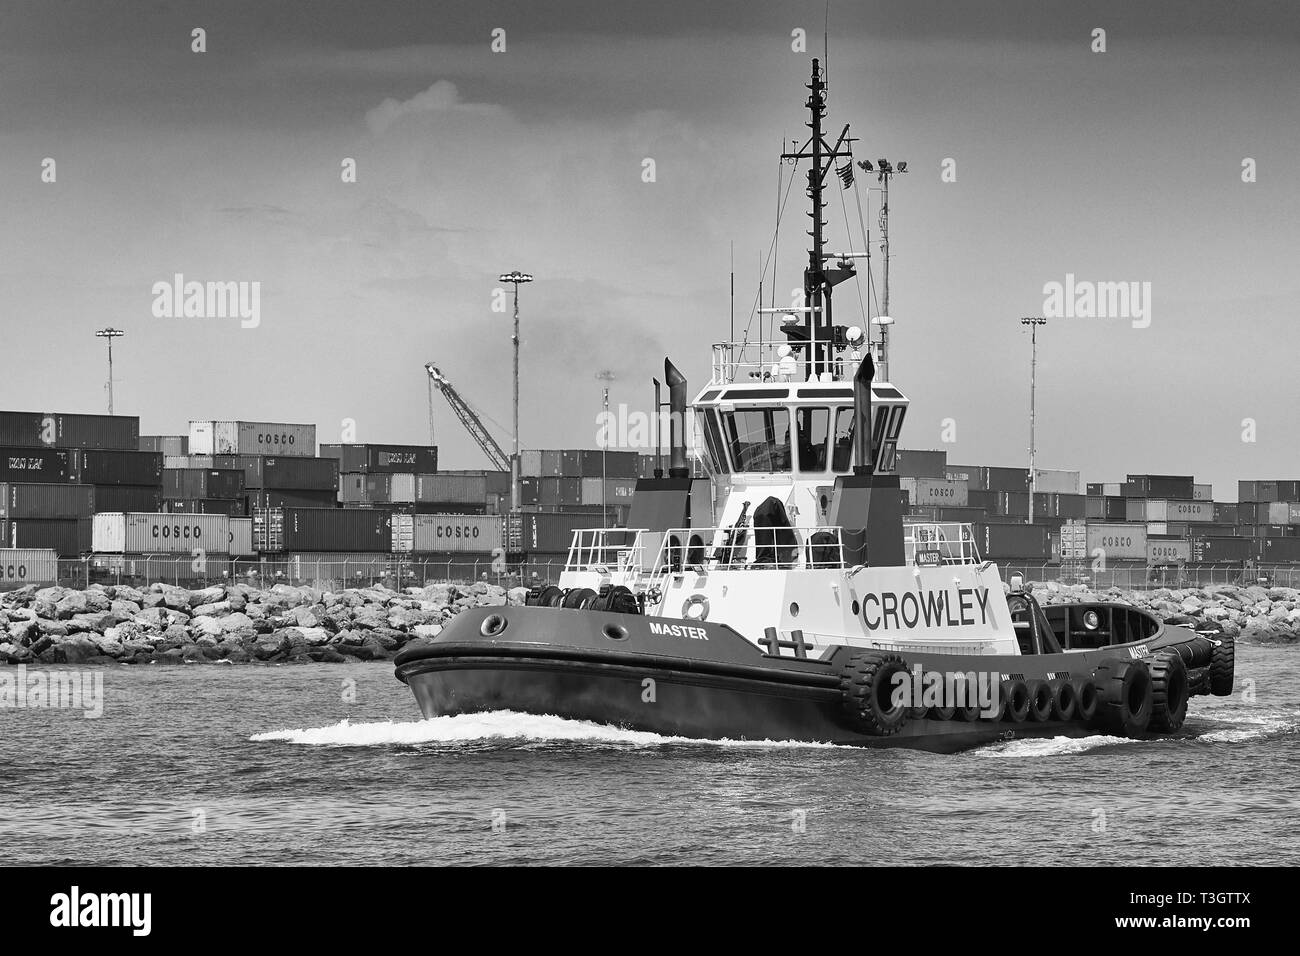 Black And White Photo Of A Crowley Maritime Tractor Tug, MASTER, Underway In The Port Of Long Beach, California, USA. Stock Photo